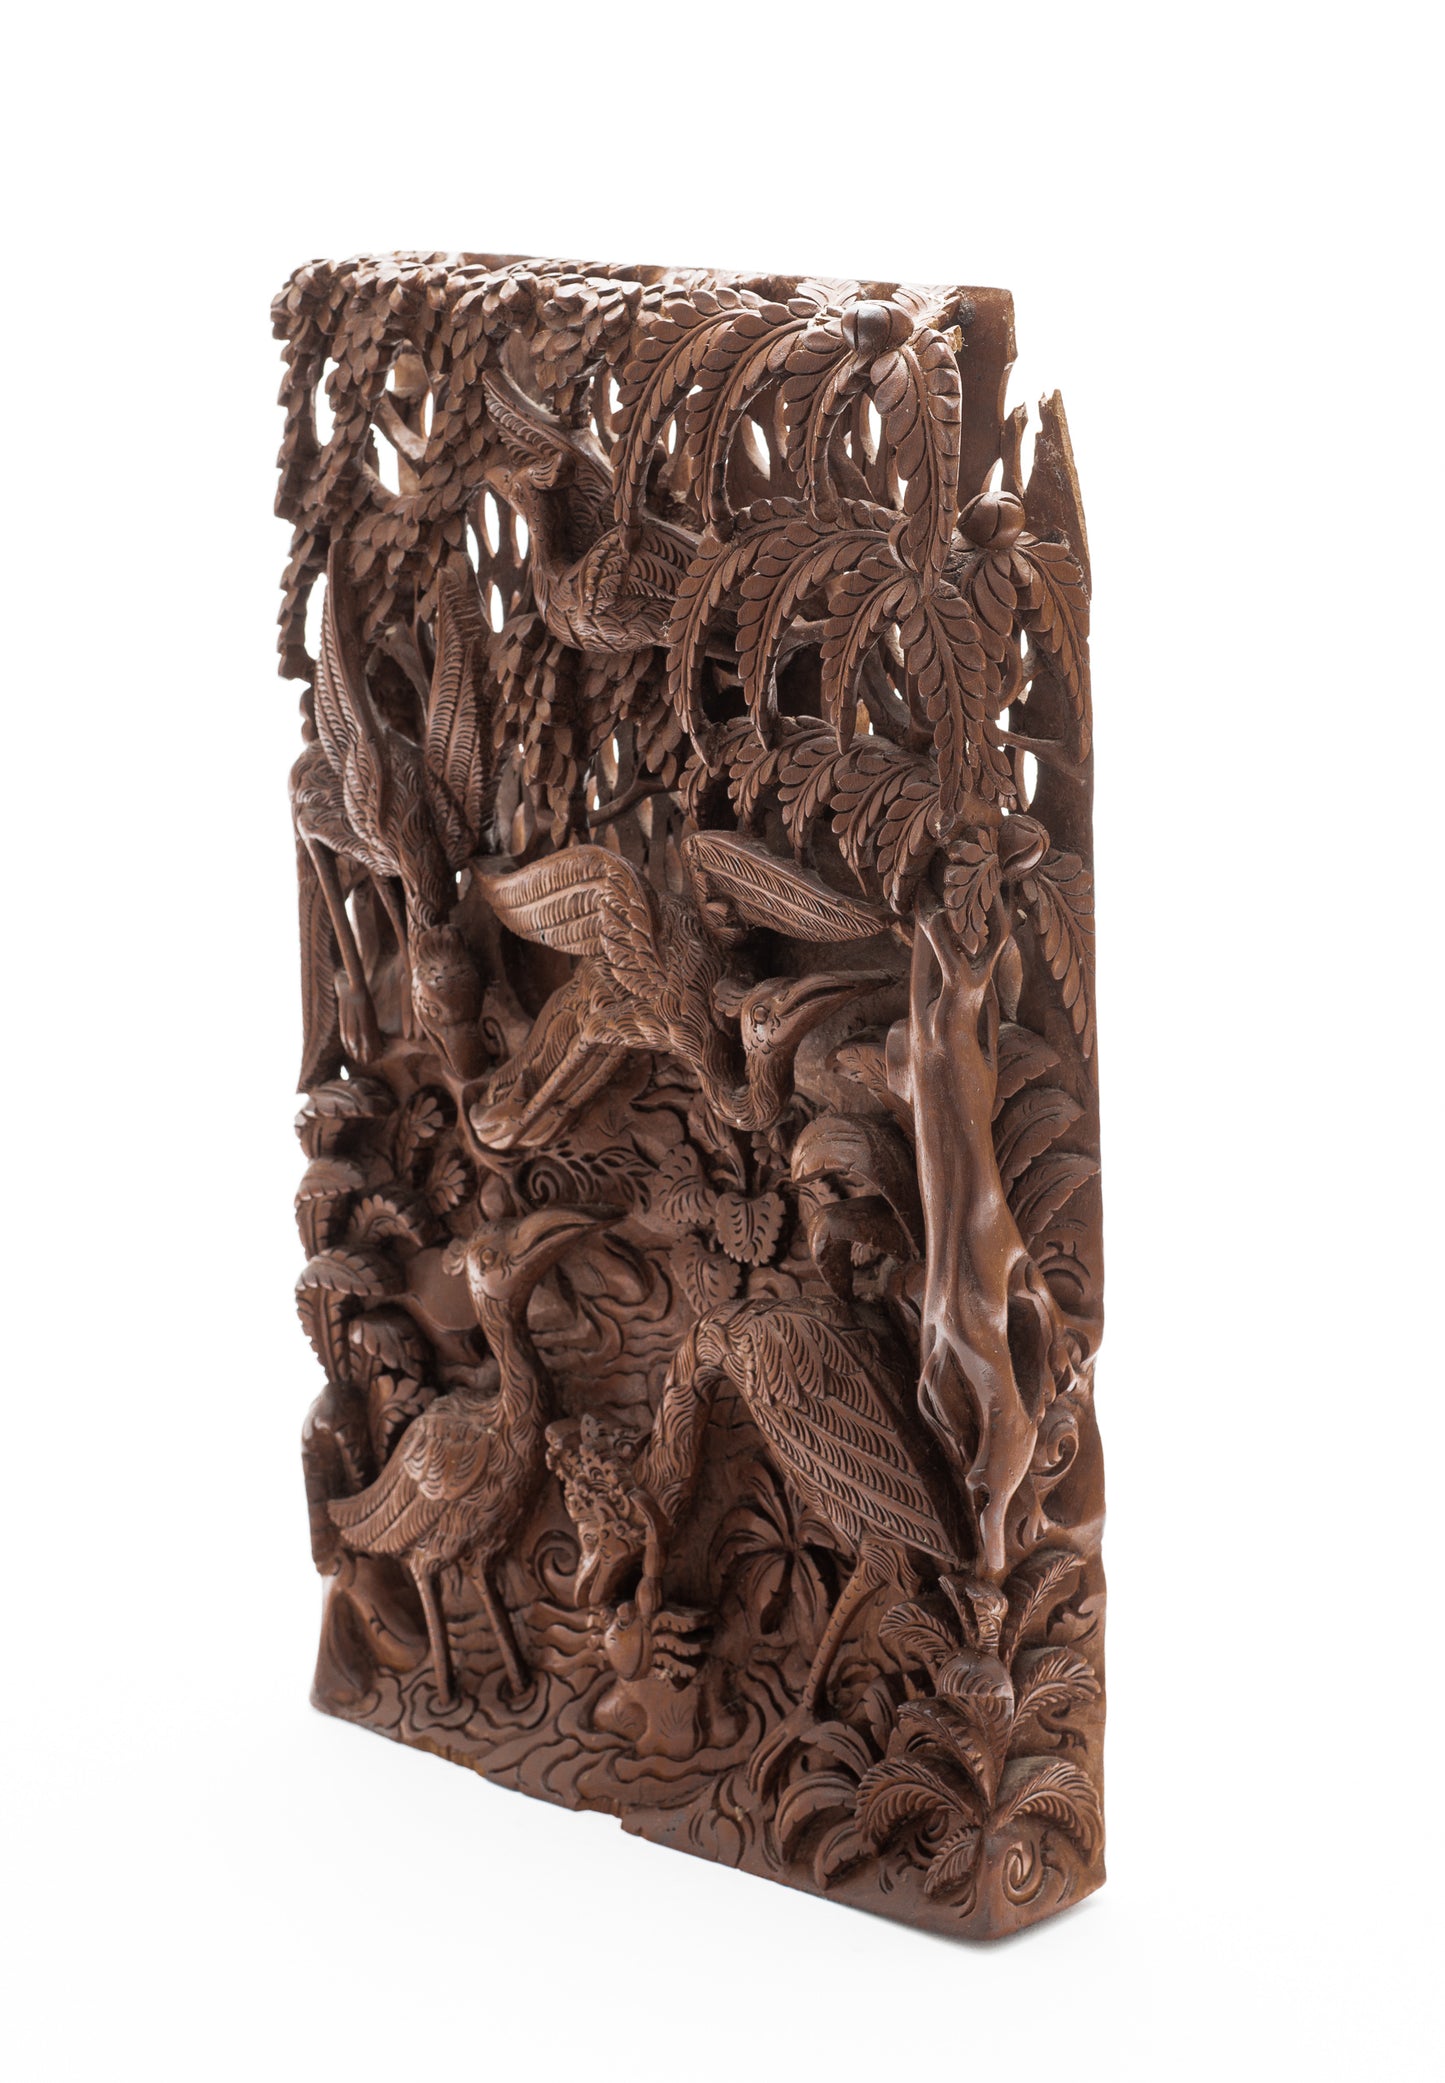 Balinese Carved 3D Wood Panel The Stork & Crab from the Tantri Kamandaka (Code 2206)